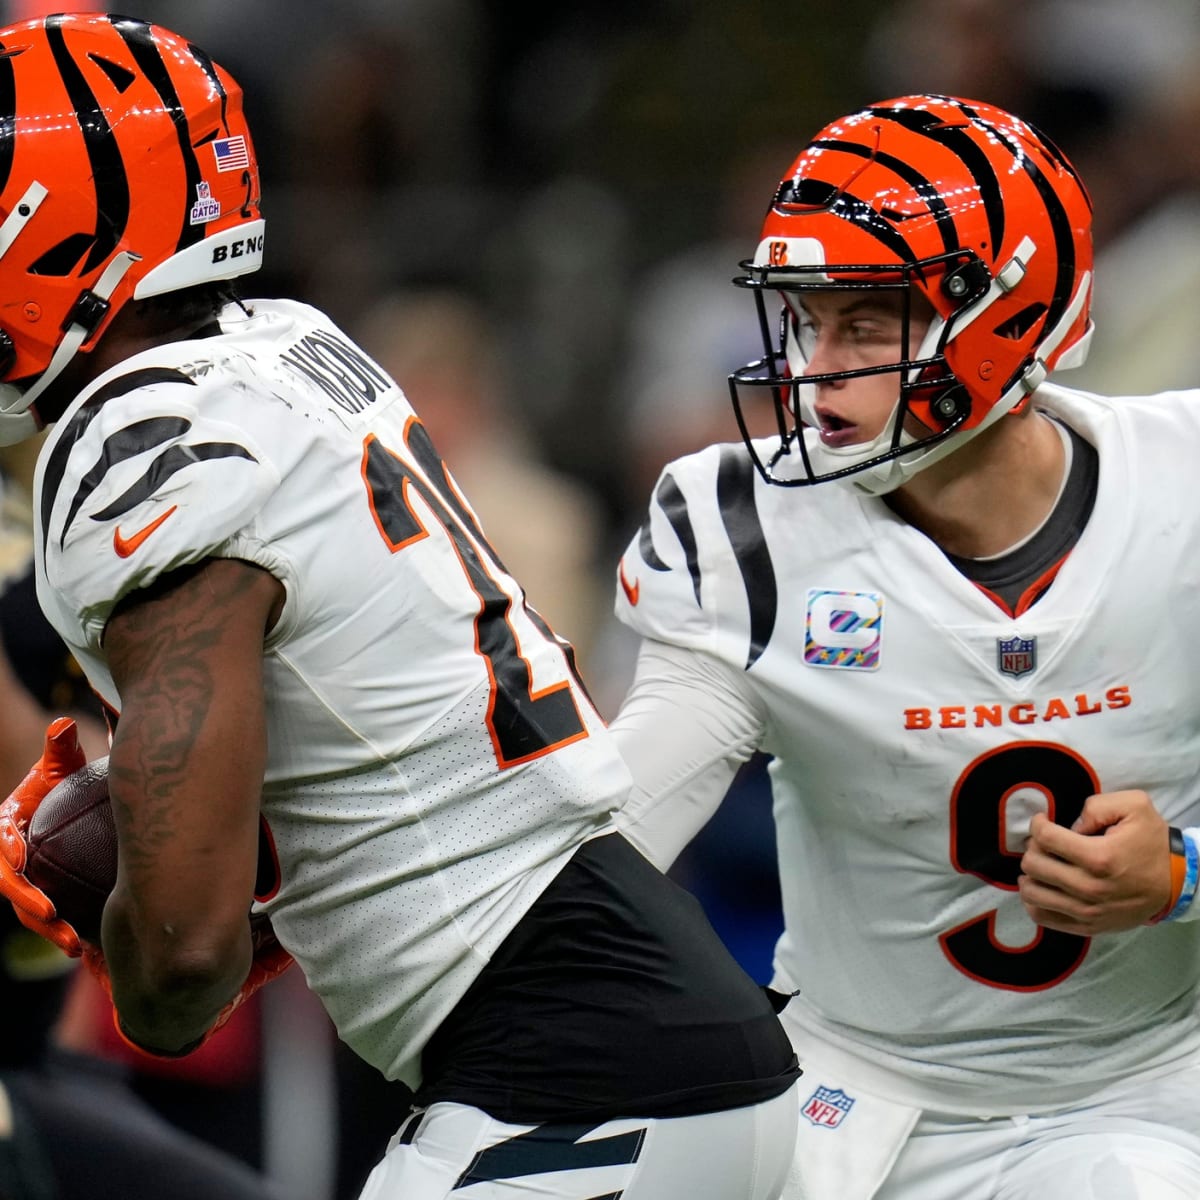 Bengals announce they will wear white uniforms for MNF game